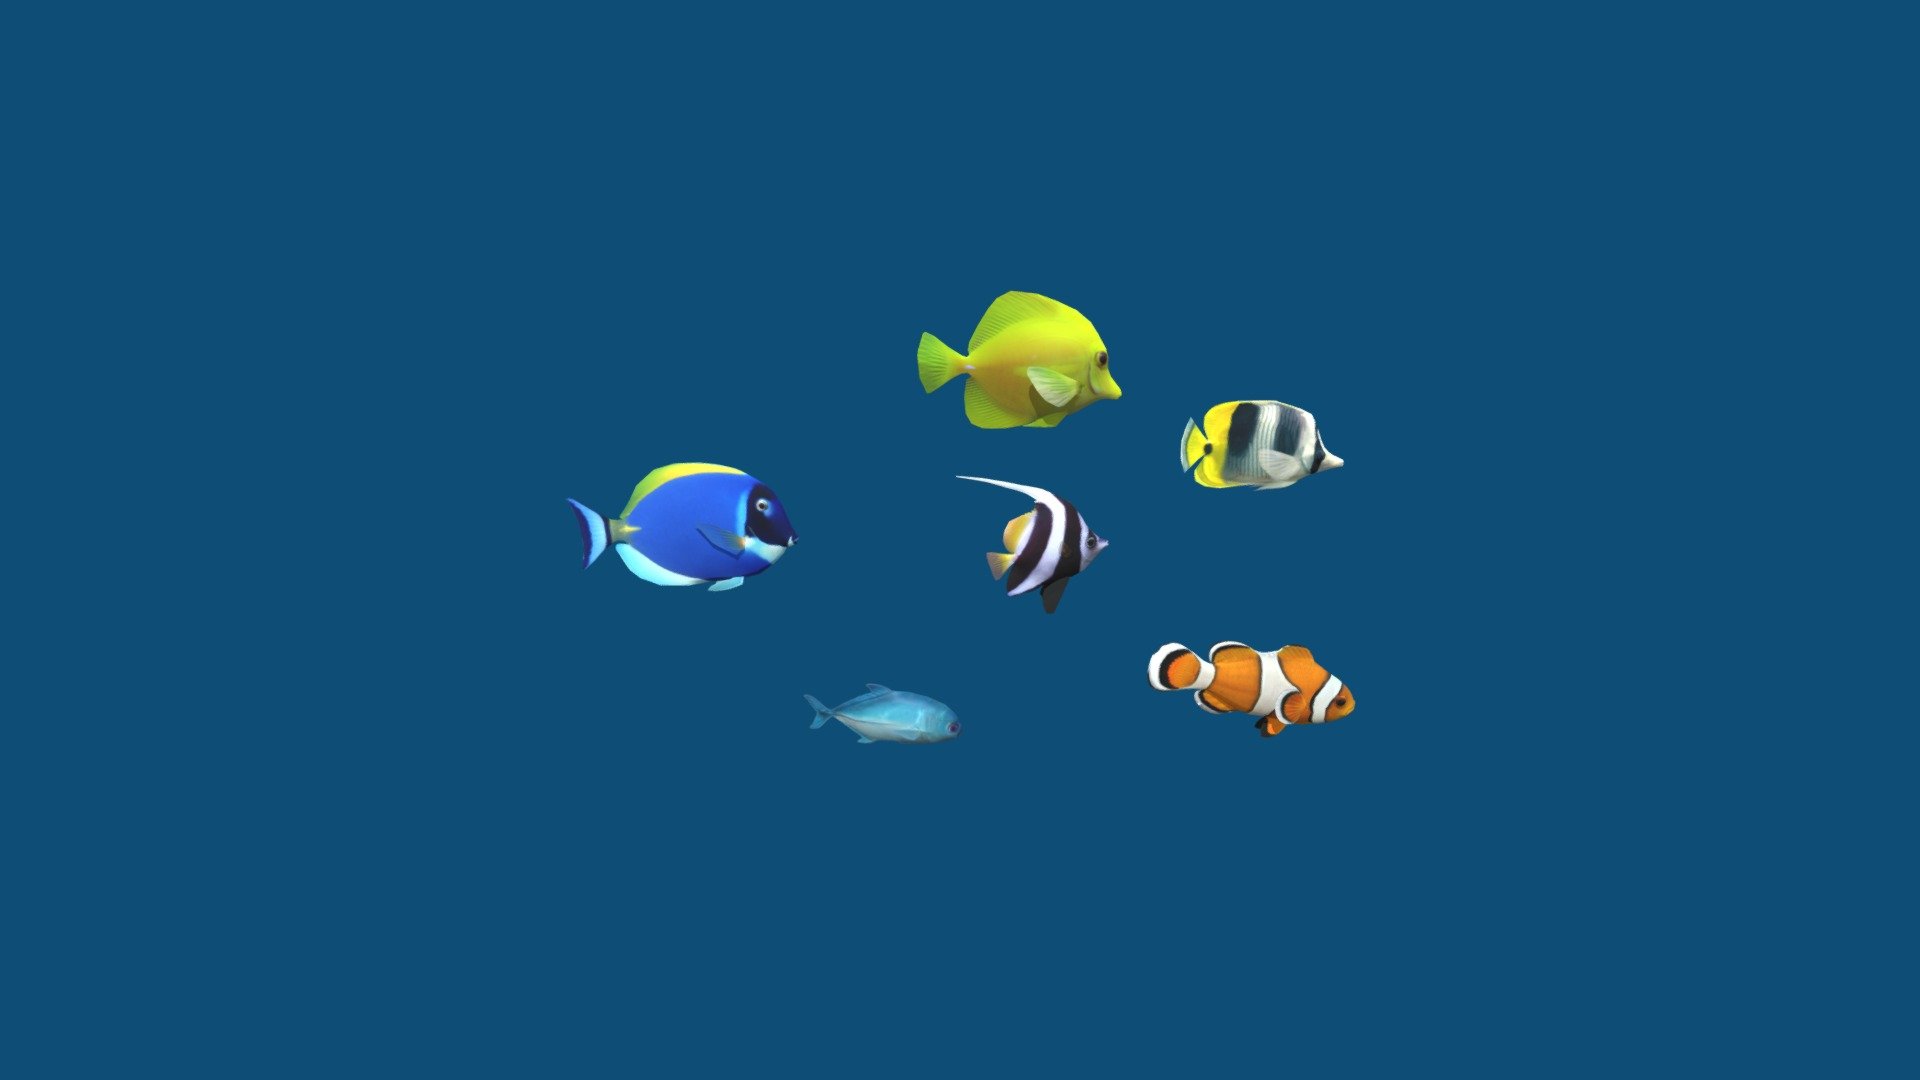 ! There is my 3nd version of this pack with 7 fish https://skfb.ly/ouUWz 





Coral Fish Pack

includes 6 animations:

1 Clownfish.................... (idle 0-193)

2 Double-Saddle fish.... (idle 0-250)

3 Blue Tang ....................(idle 0-270)

4 Yellow Tang .................(idle 0-248)

5 Caranx......................... (idle 0-60)

6 Bannerfish................ (idle 0-278) - Coral Fish Pack 6 - 3D model by Mikhail Nesterov (@cgsoul) 3d model